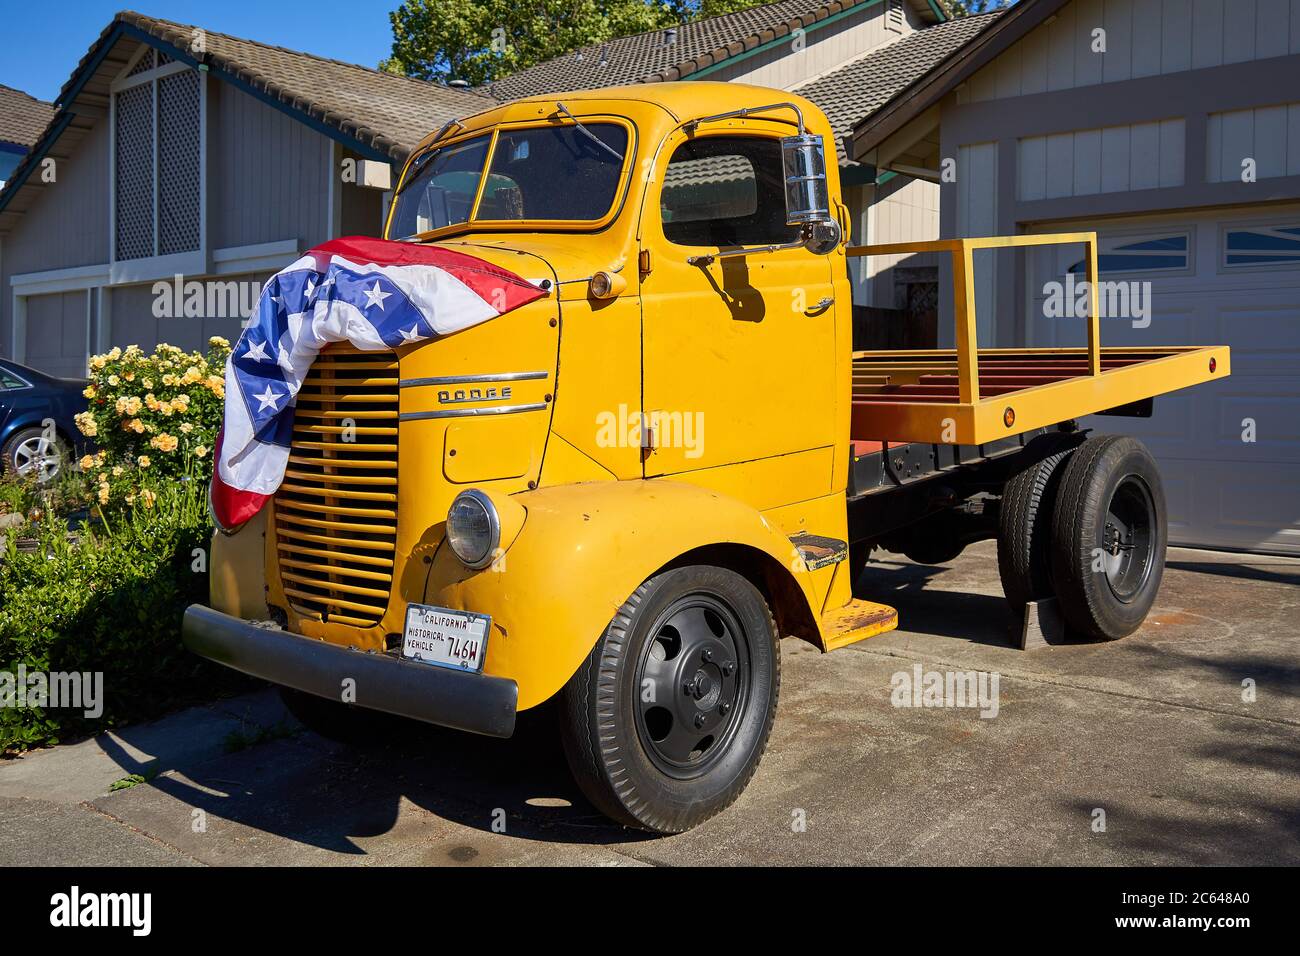 Classic Dodge truck with yellow exterior and American bunting flag on the hood. California Historical Vehicle in Windsor, California. Stock Photo